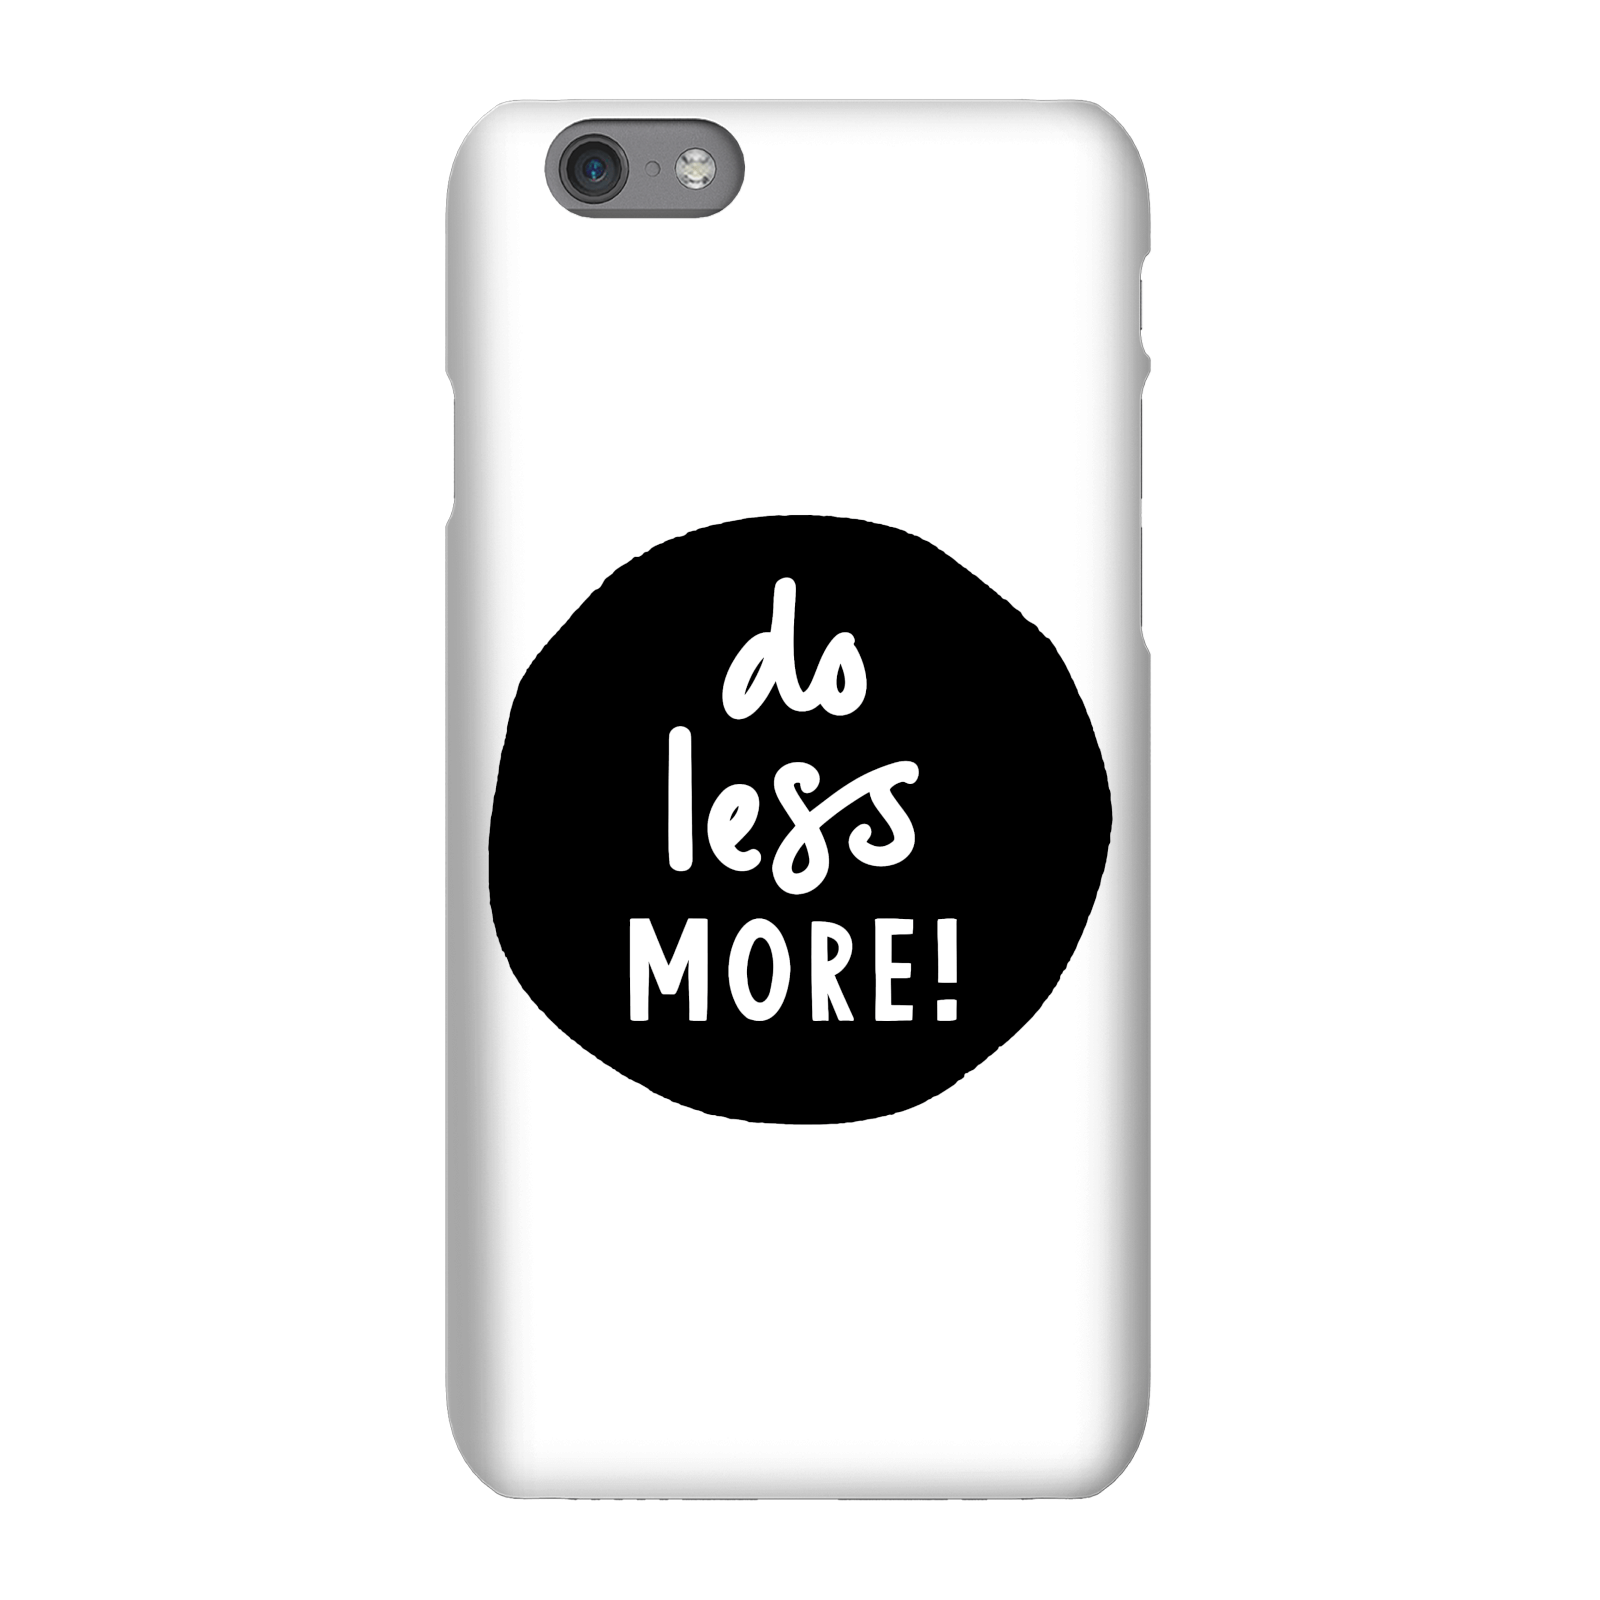 The Motivated Type Do Less More Phone Case for iPhone and Android - iPhone 5/5s - Snap Case - Matte